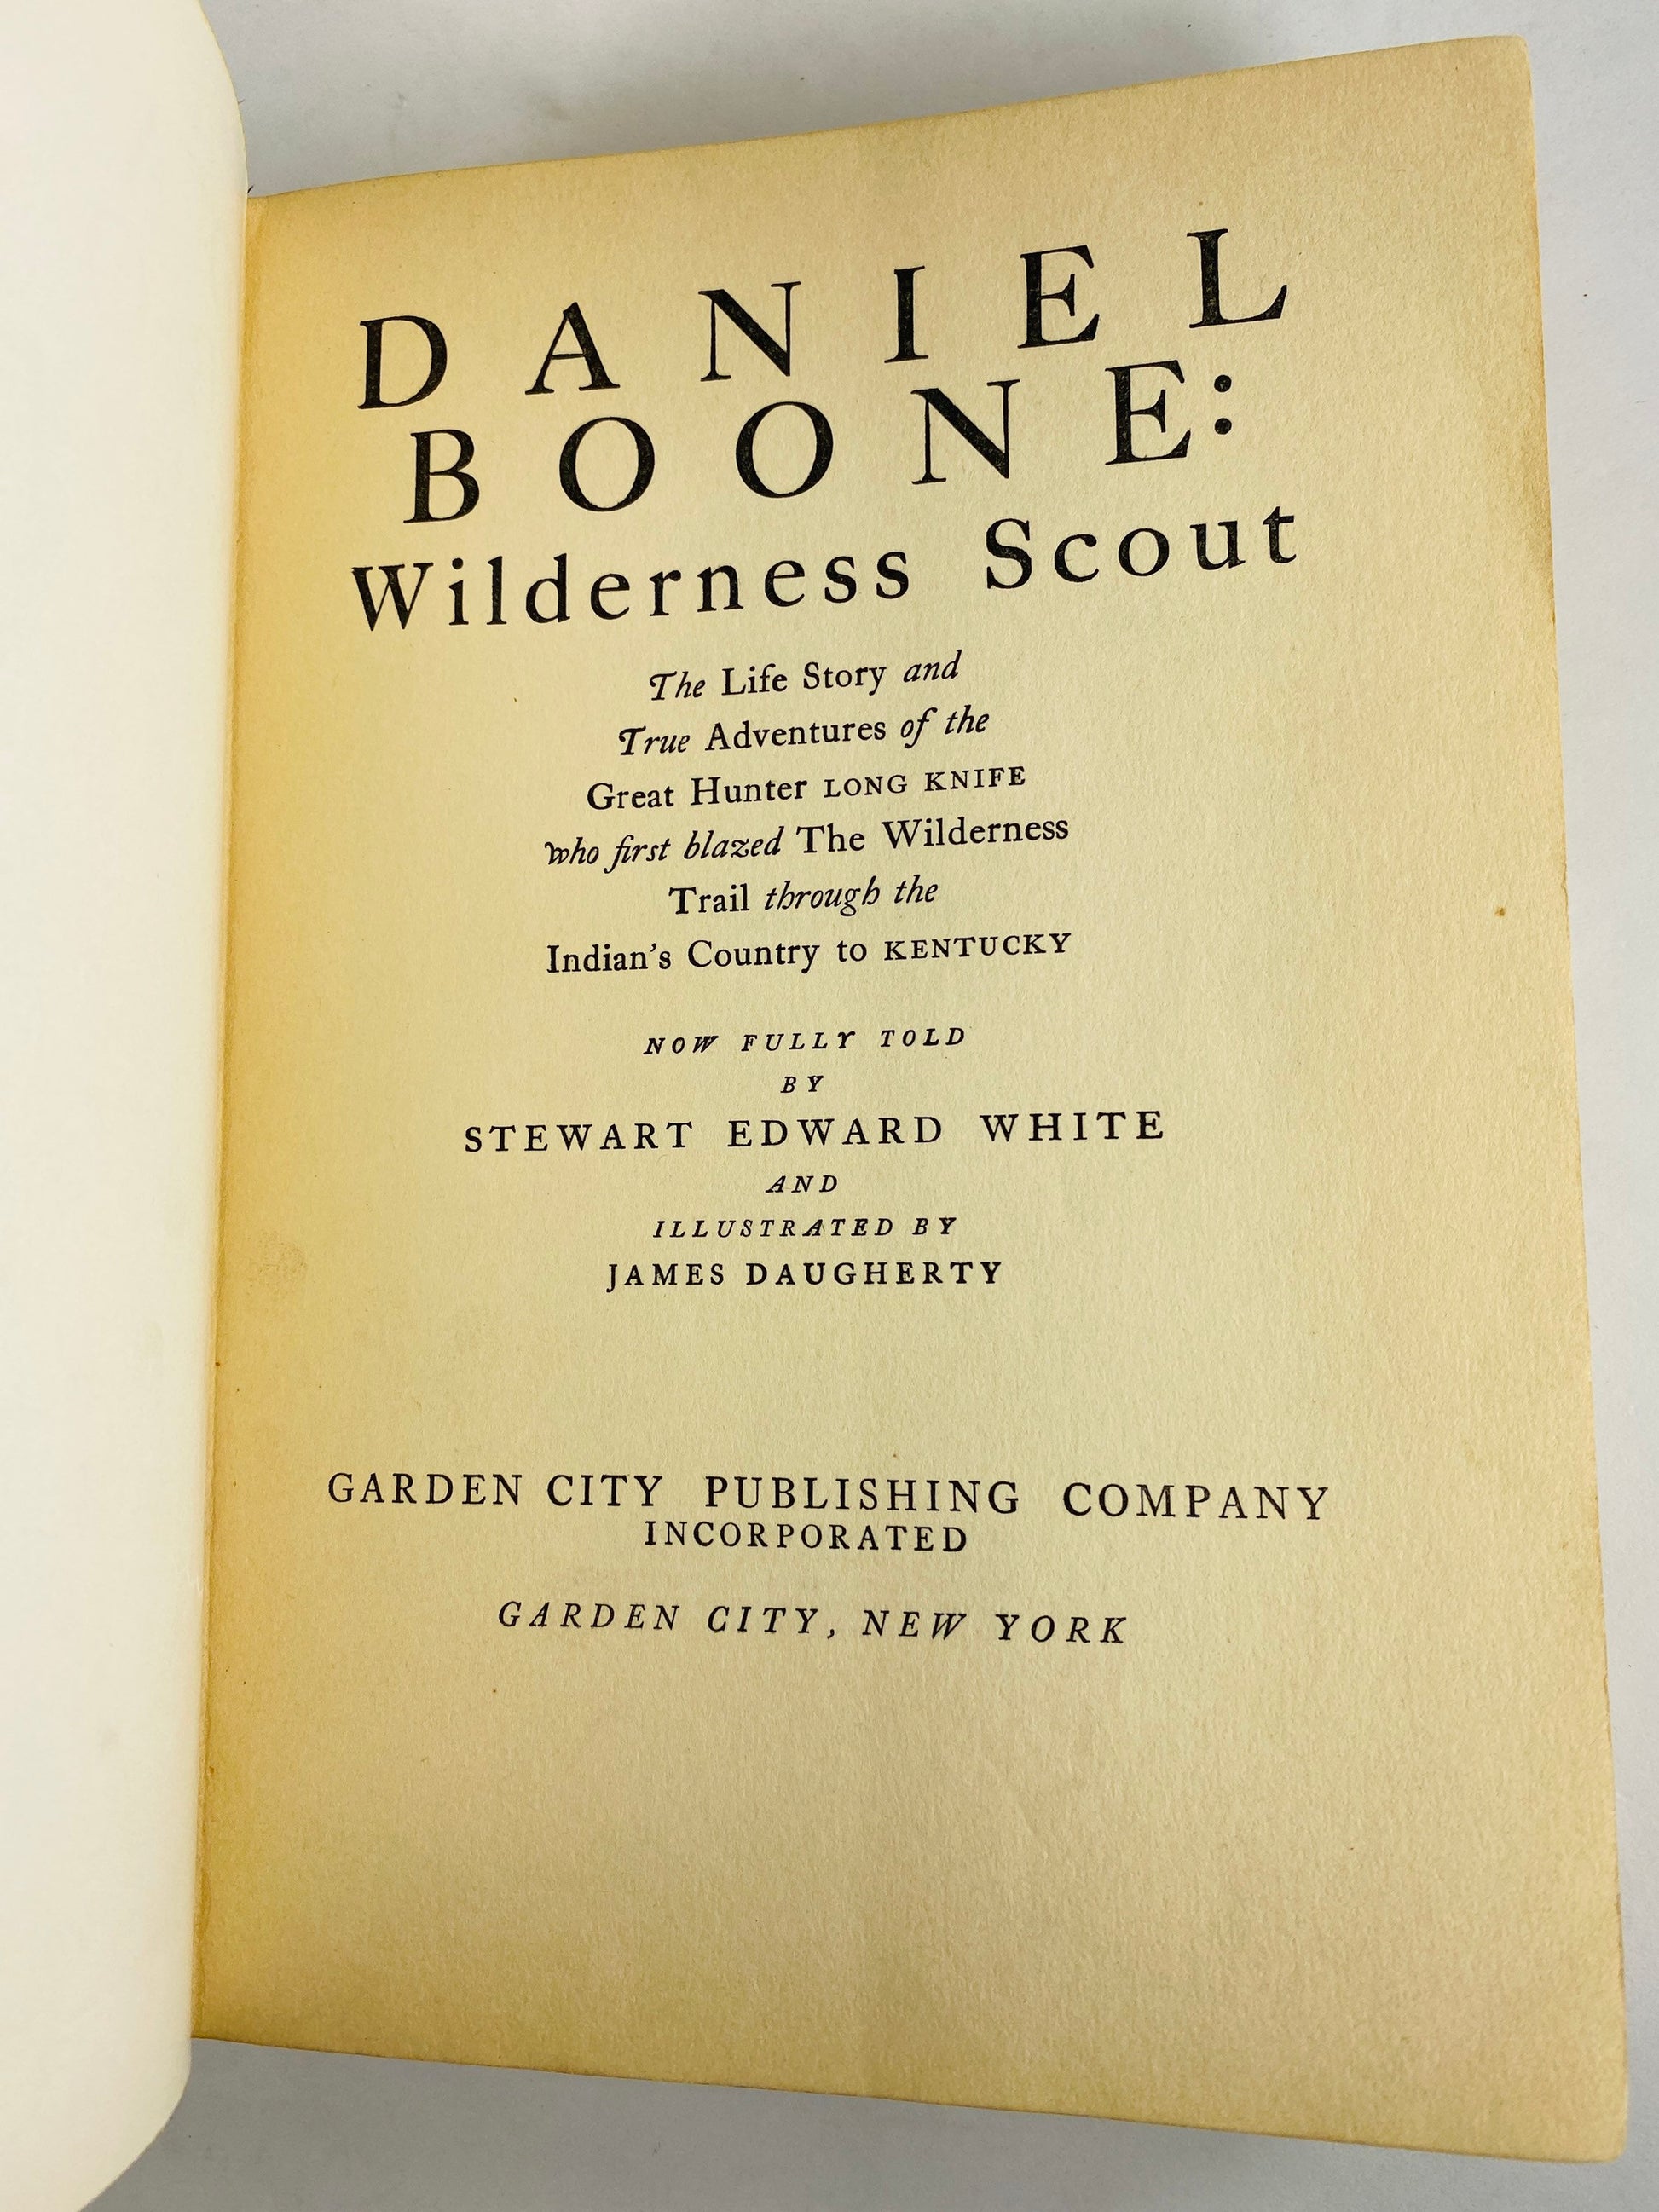 1922 Daniel Boone, Wilderness Scout by Stewart Edward White Vintage book finely illustrated. Green antique decor Poor Condition